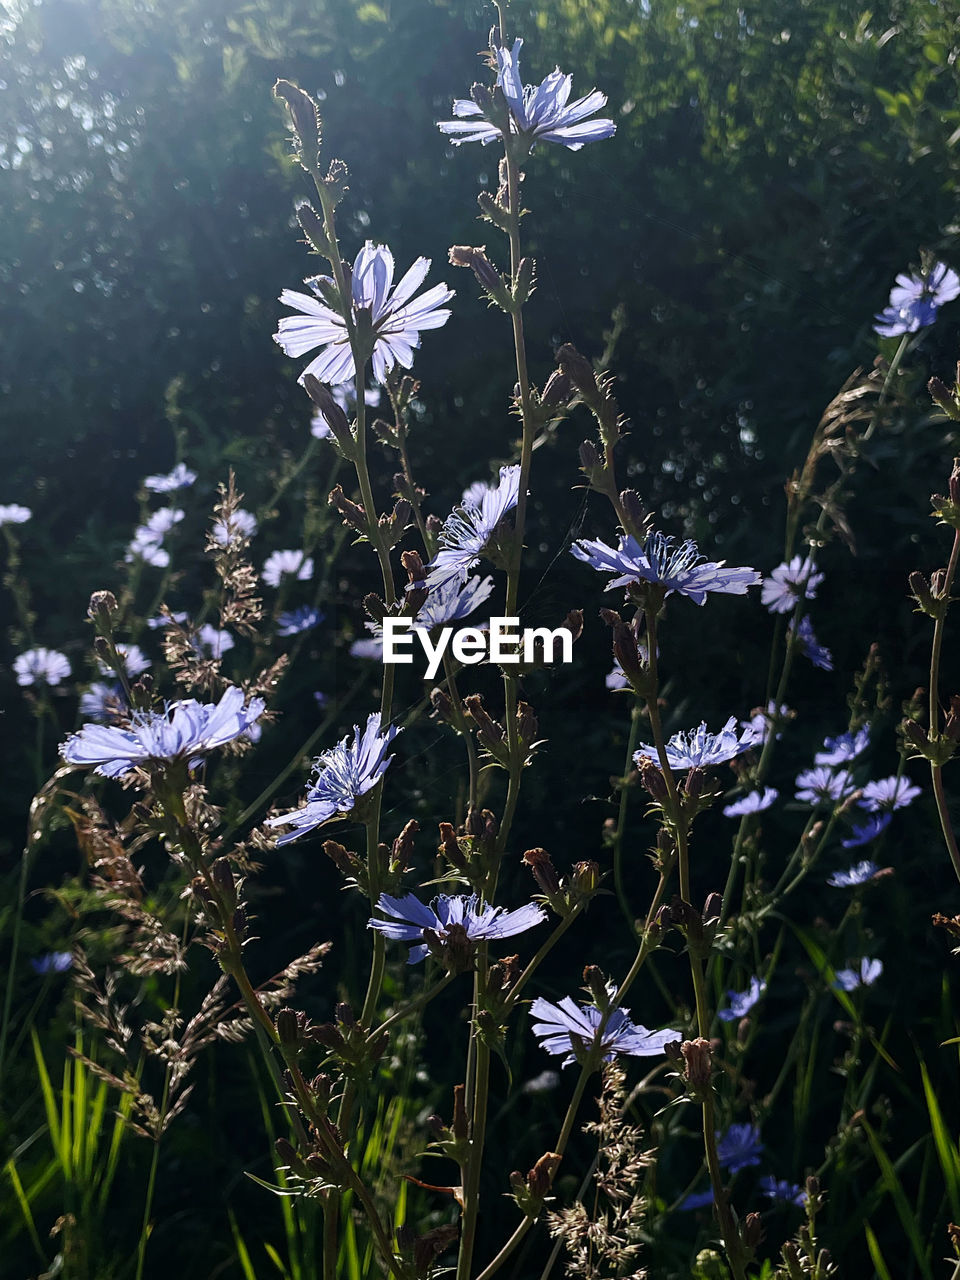 plant, flower, flowering plant, beauty in nature, nature, growth, freshness, fragility, meadow, no people, close-up, wildflower, day, land, sunlight, grass, field, outdoors, tranquility, petal, blossom, botany, springtime, flower head, purple, white, water, inflorescence, focus on foreground